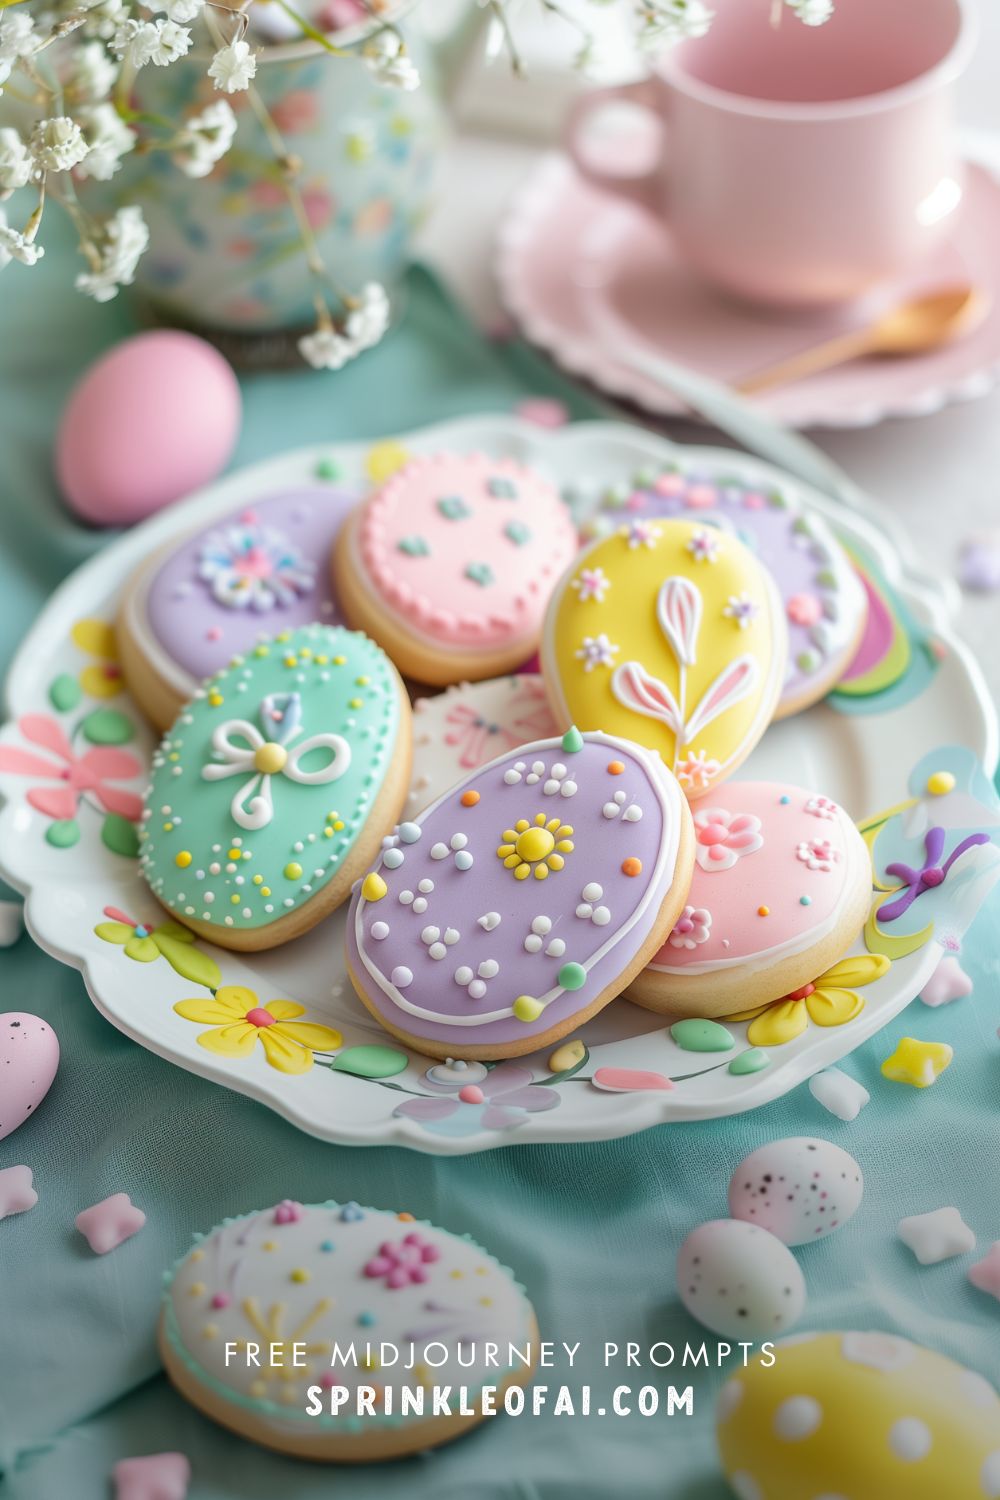 Best Midjourney Easter Prompts for Stock Photography in Happy Pastel Colored Spring Midjourney Prompts